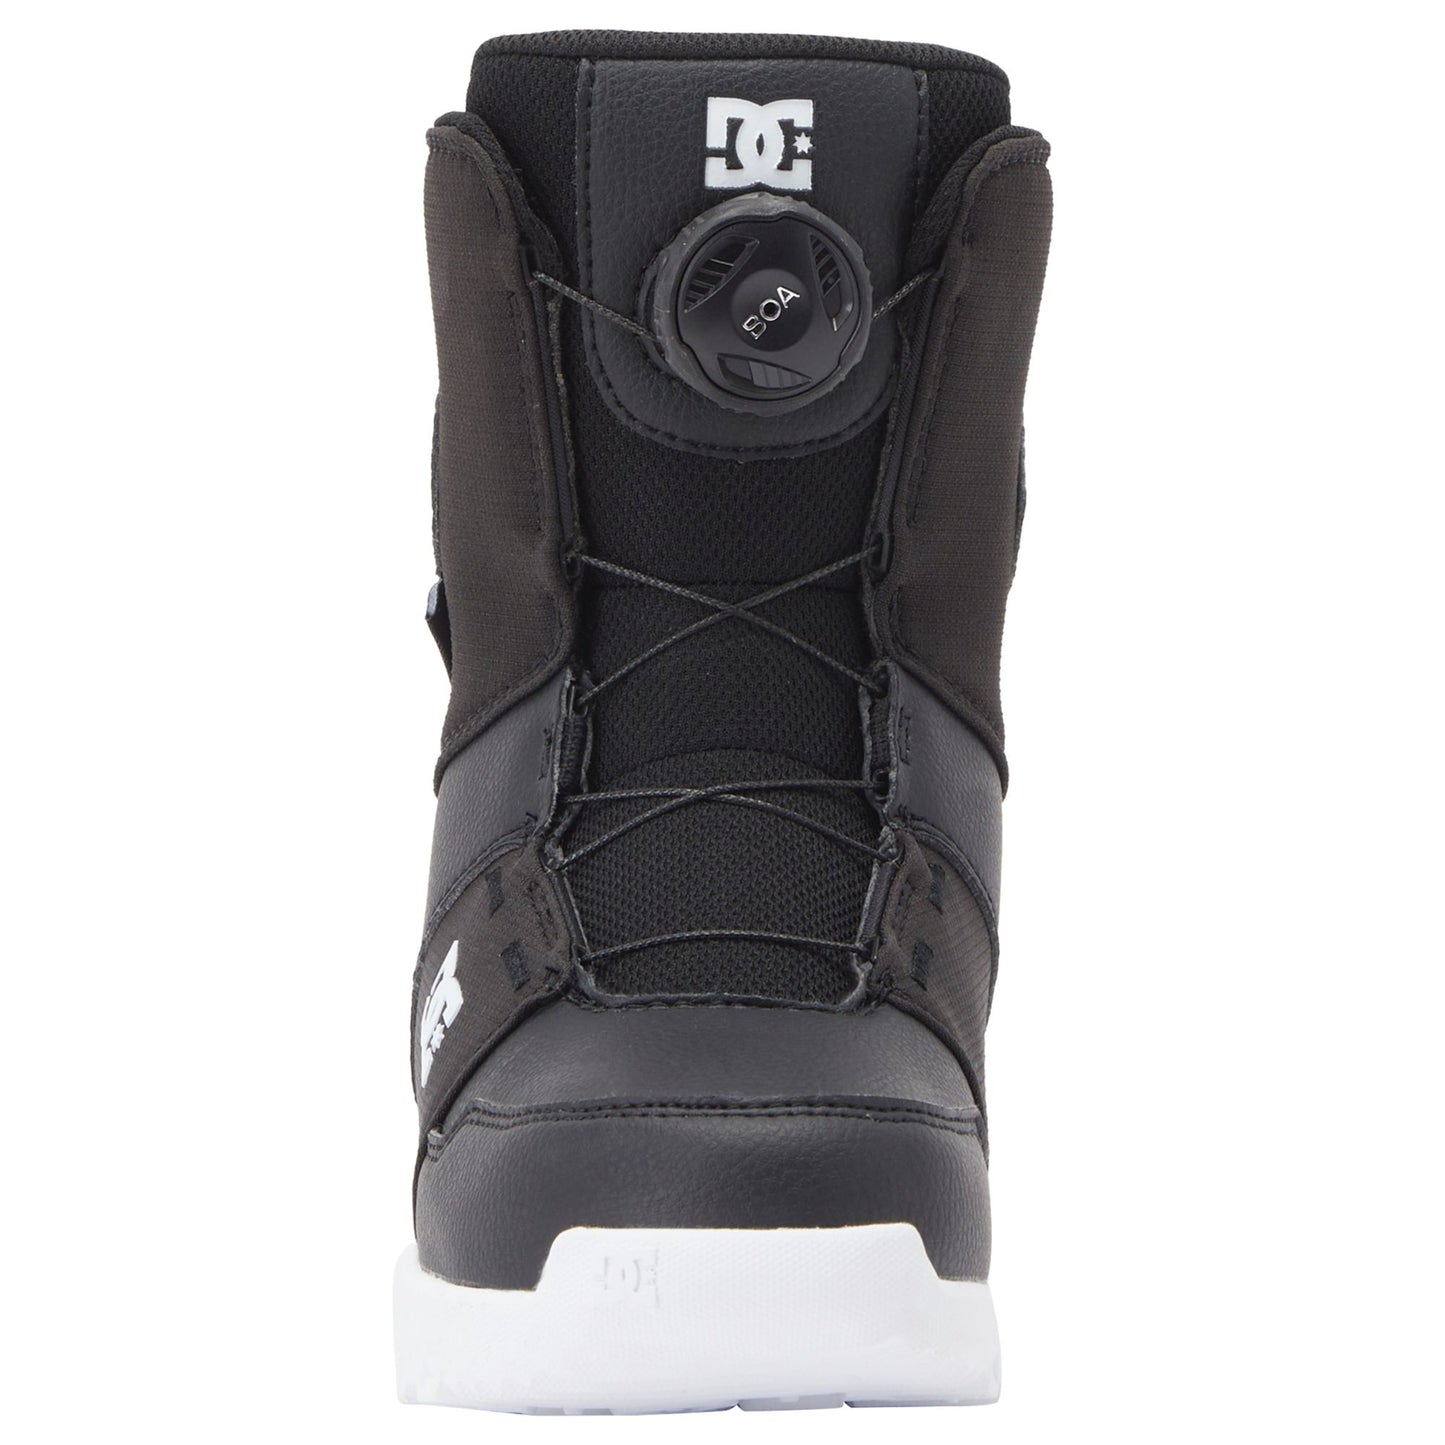 DC Youth Scout BOA Snowboard Boots Black/White Snowboard Boots